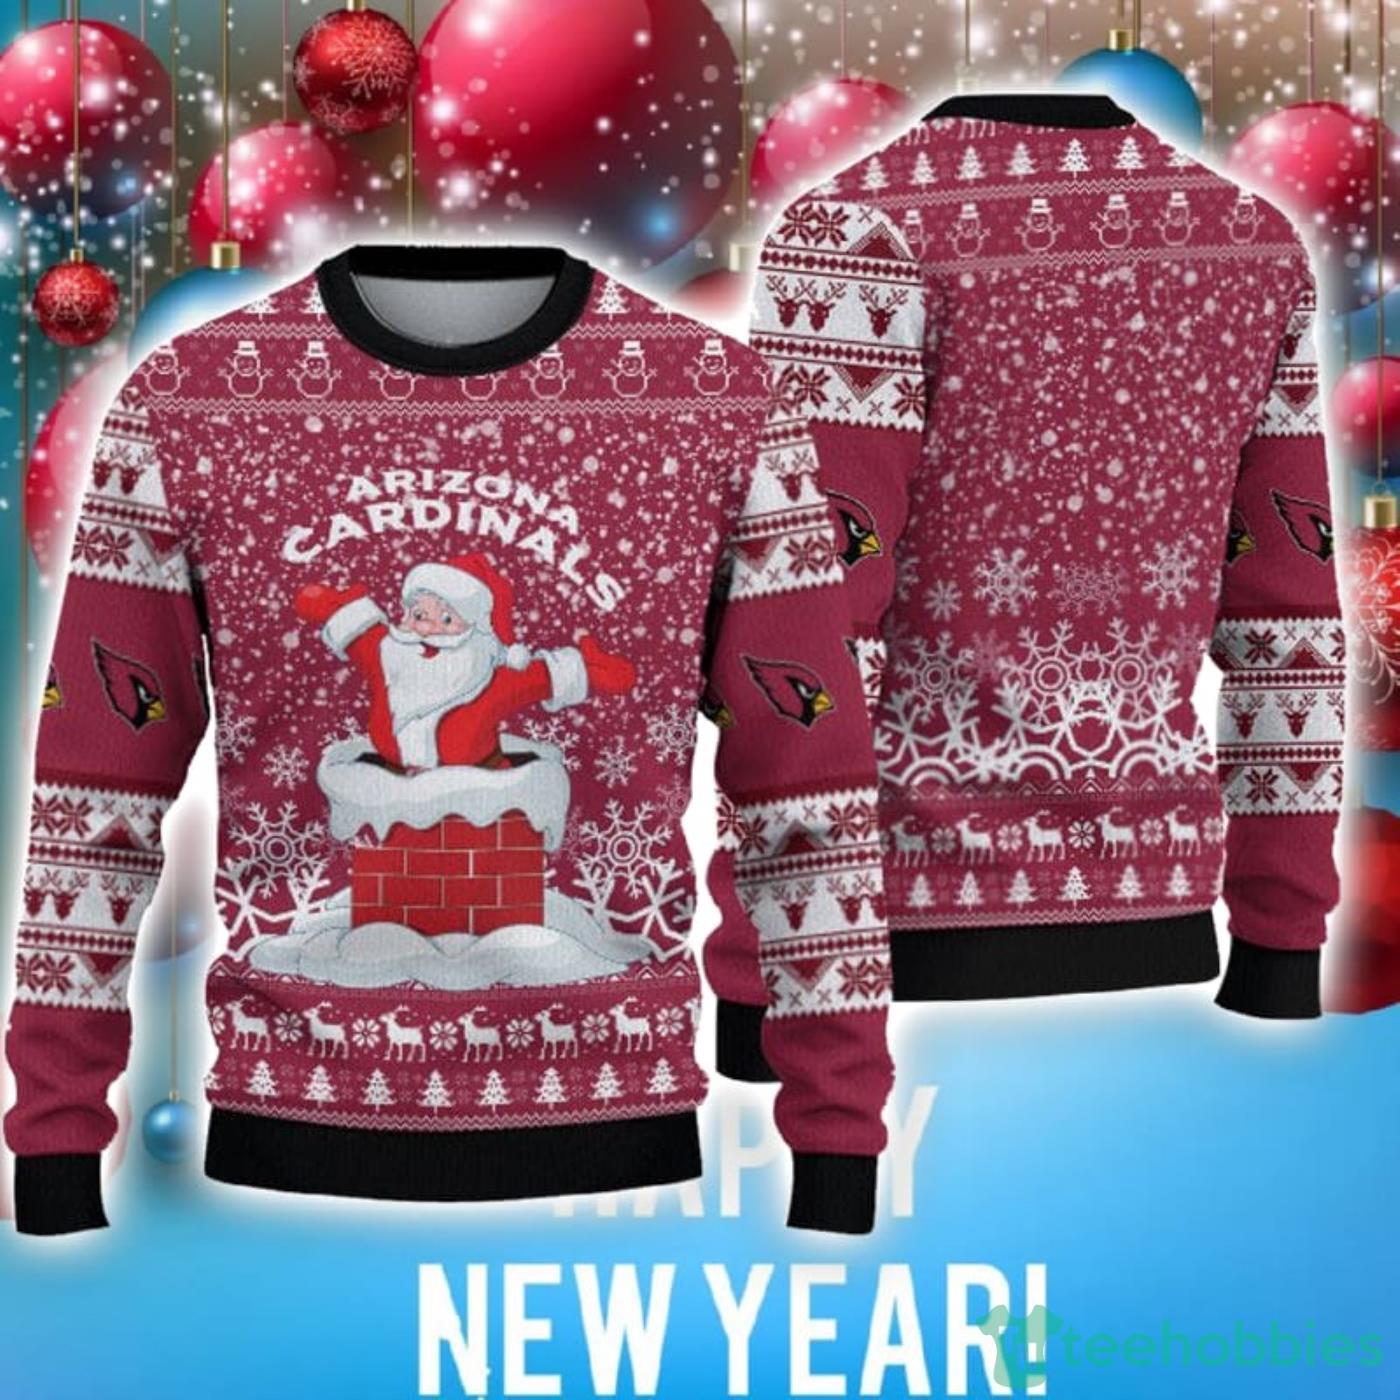 Arizona Cardinals Christmas Santa Claus Pattern Special Trend Ugly Christmas Sweater Product Photo 1